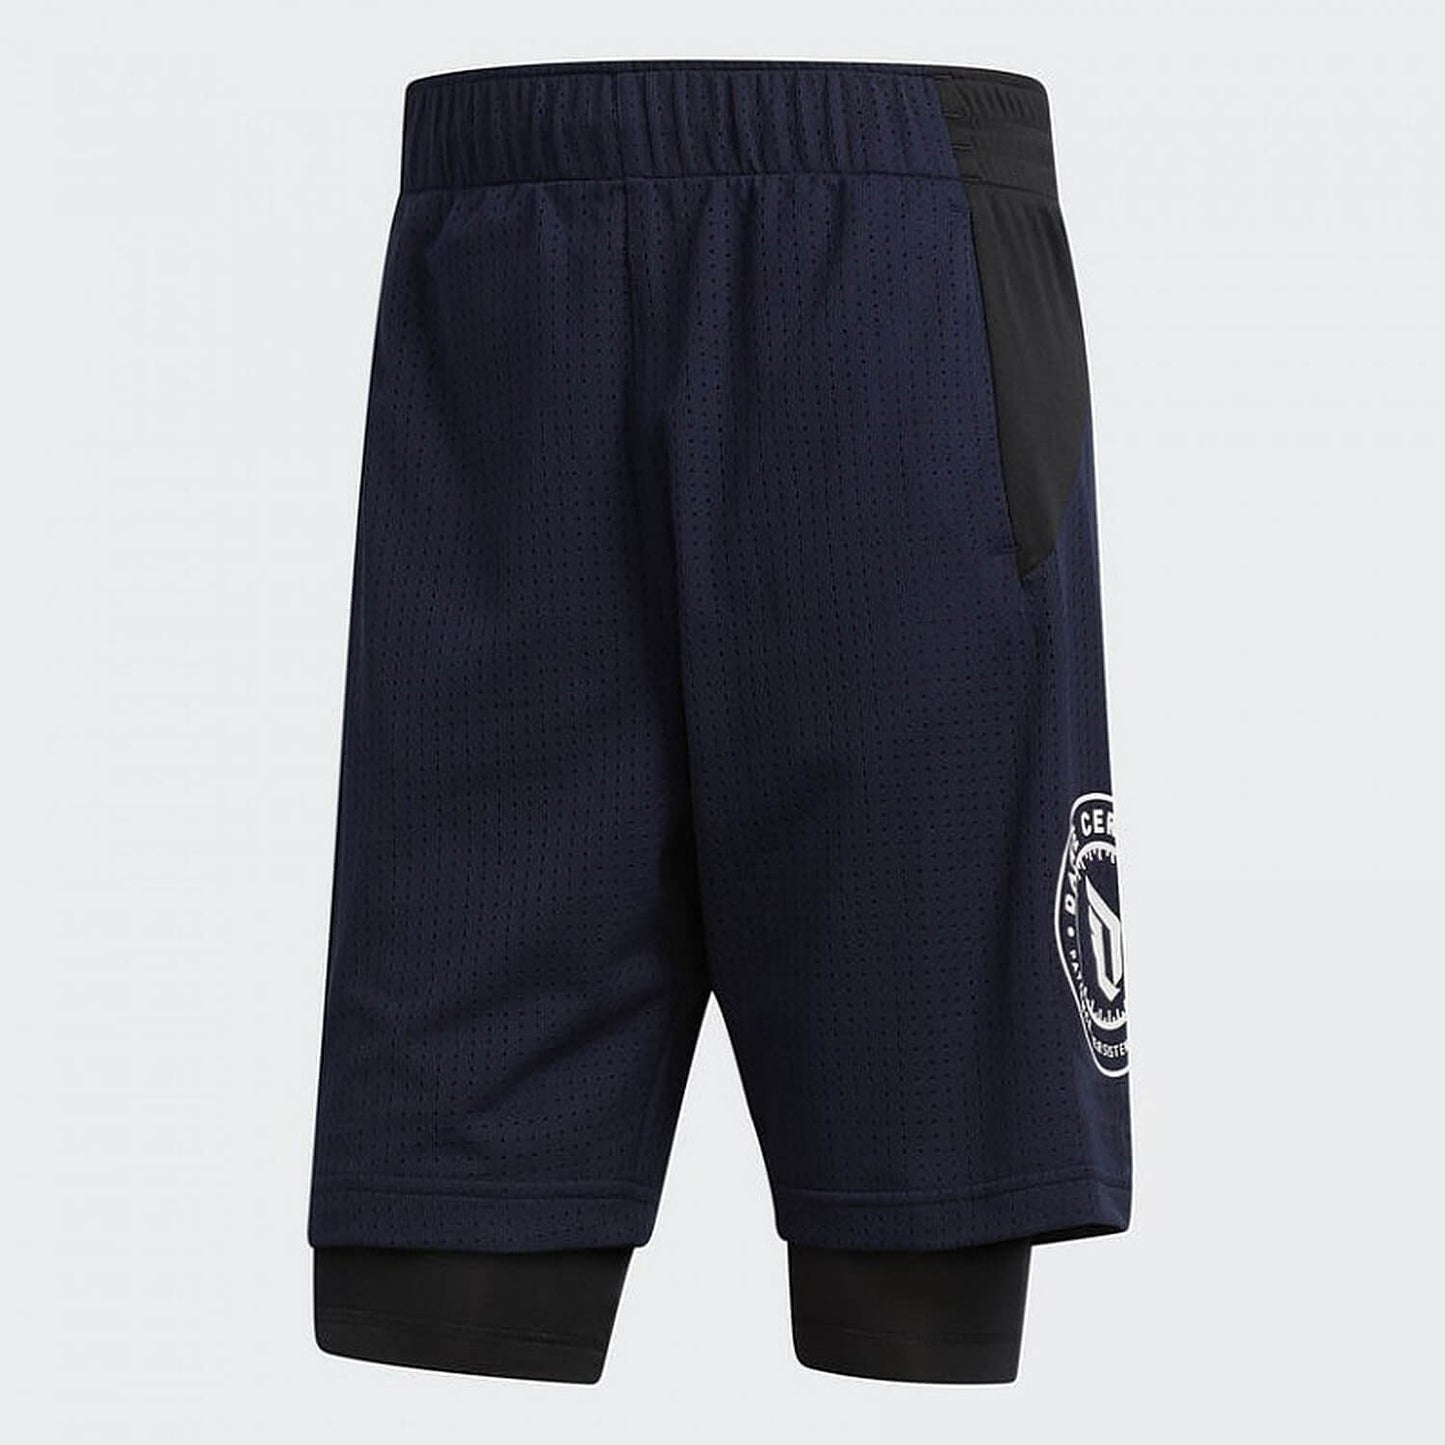 Adidas Dame Doll 2 In 1 Shorts Navy